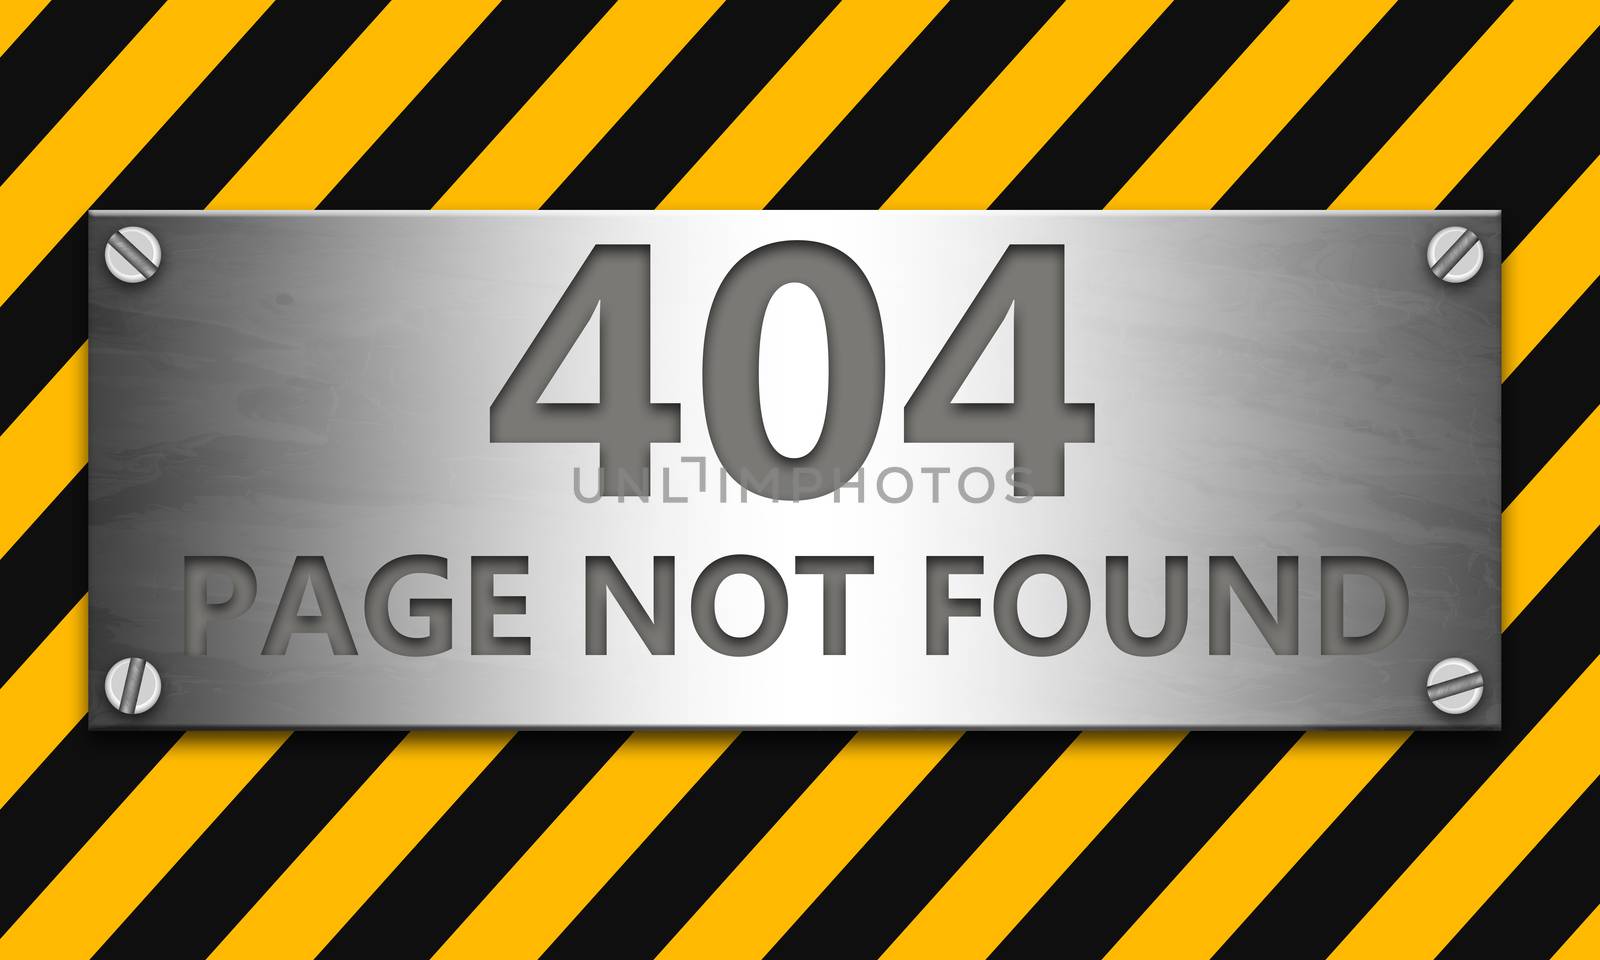 Page not found 404 banner with yellow caution strip background by tang90246